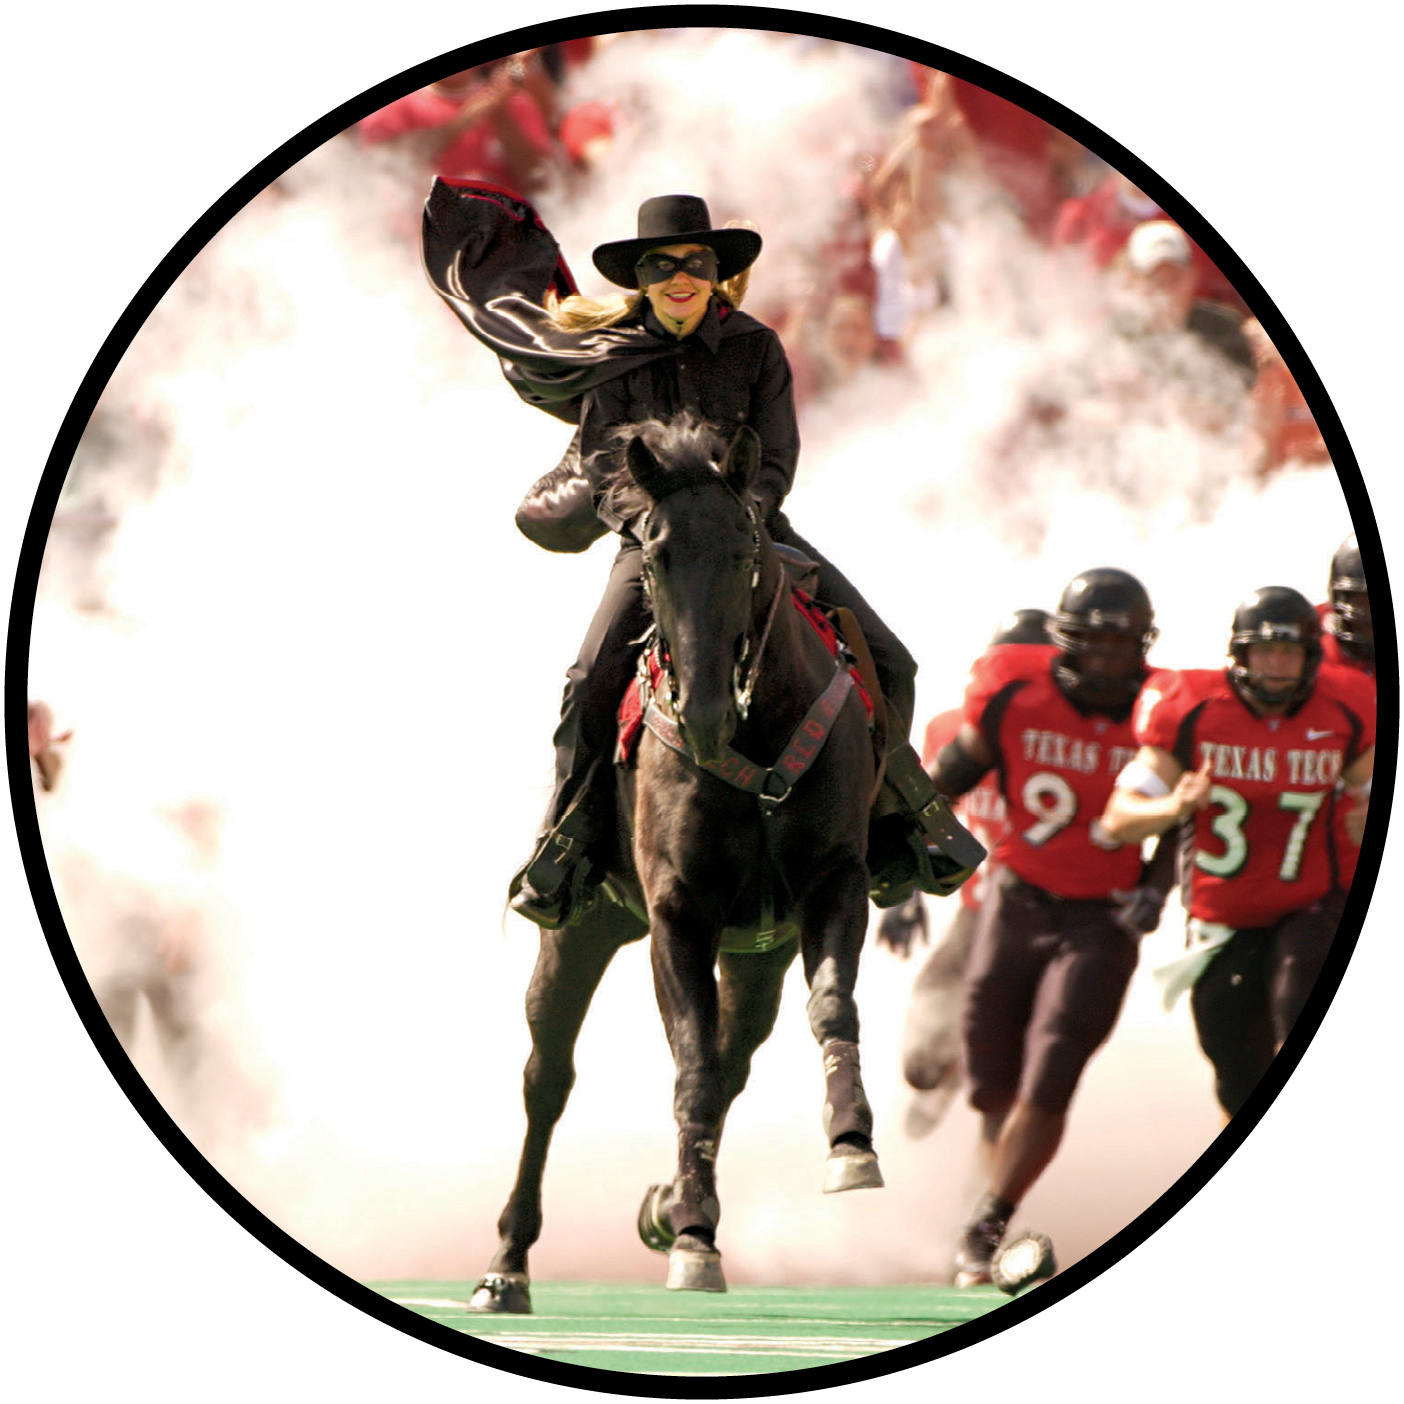 The Masked Rider and Raider Red at Texas Tech University